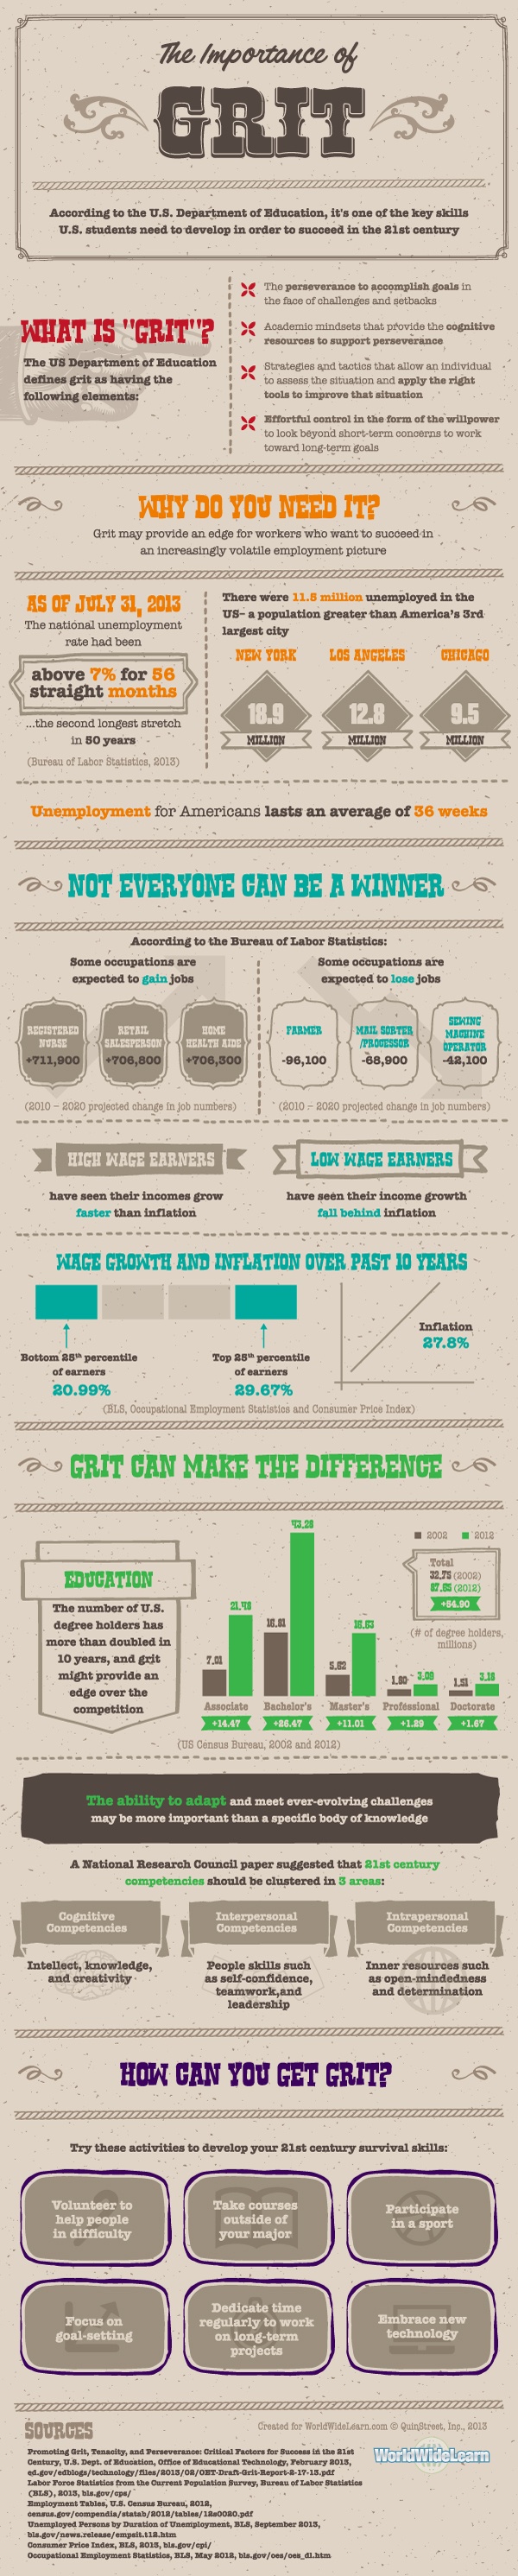 The-Importance-of-Grit-in-Students-Infographic